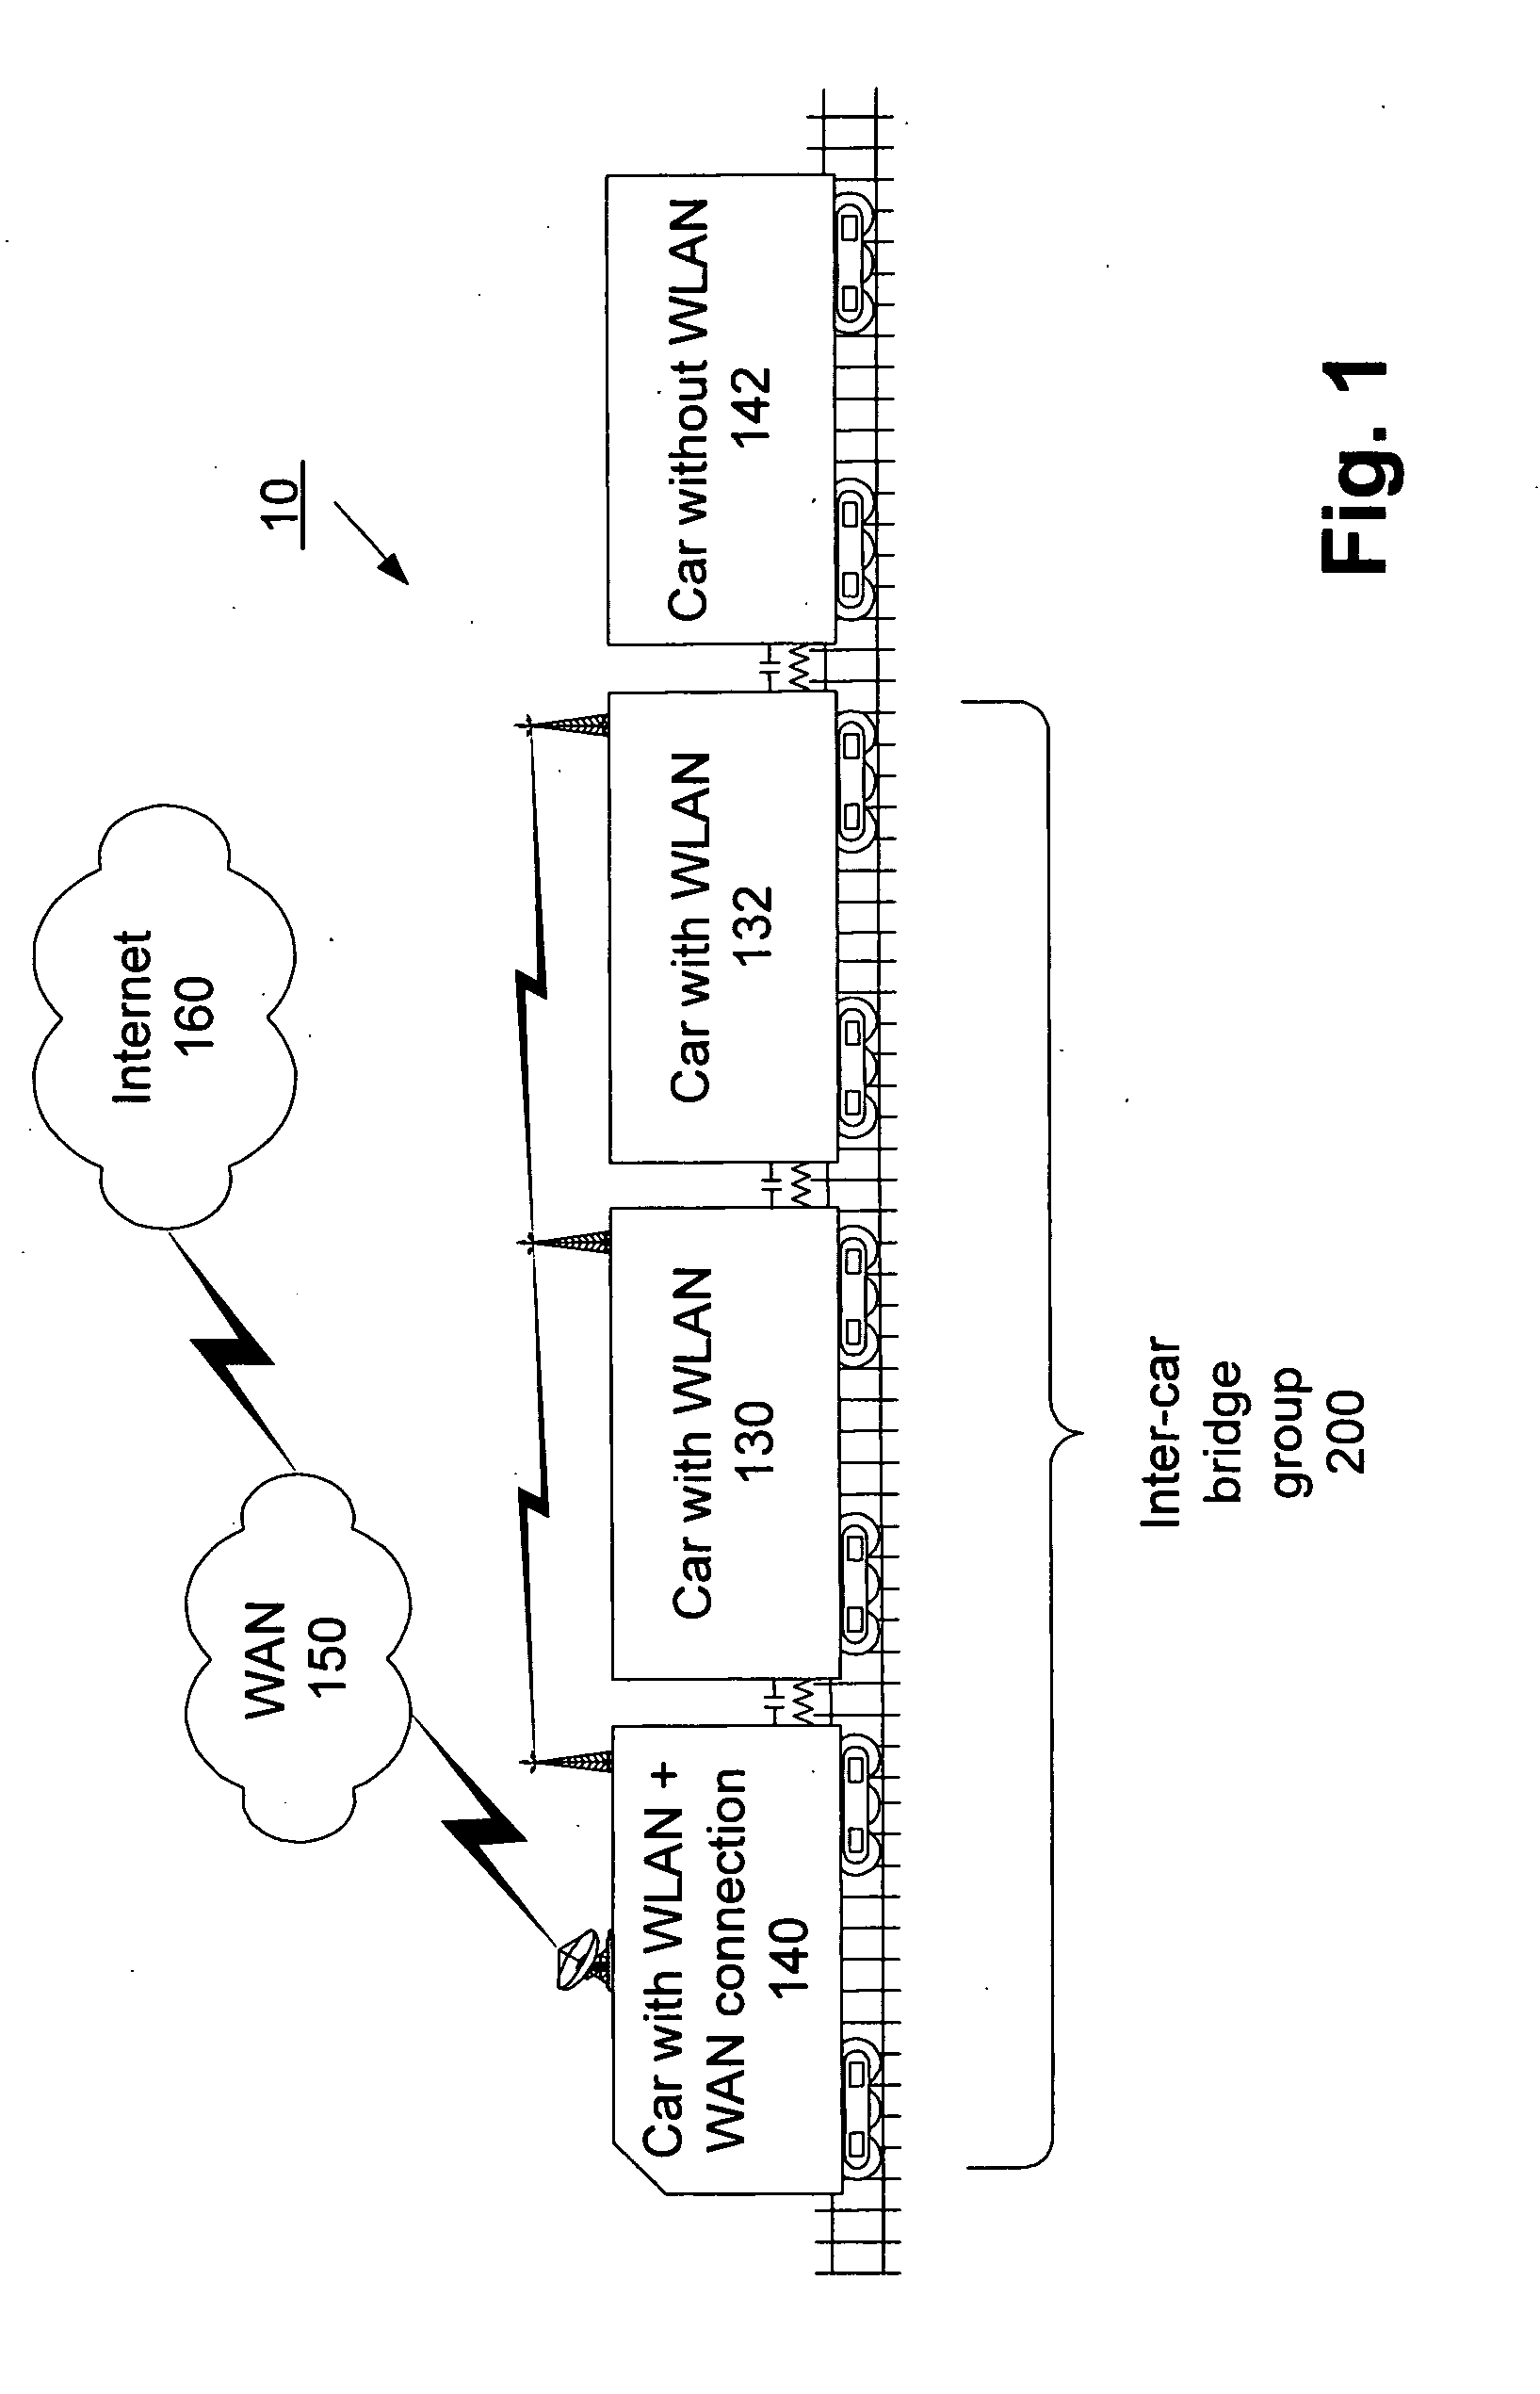 Dynamically forming wireless local area networks